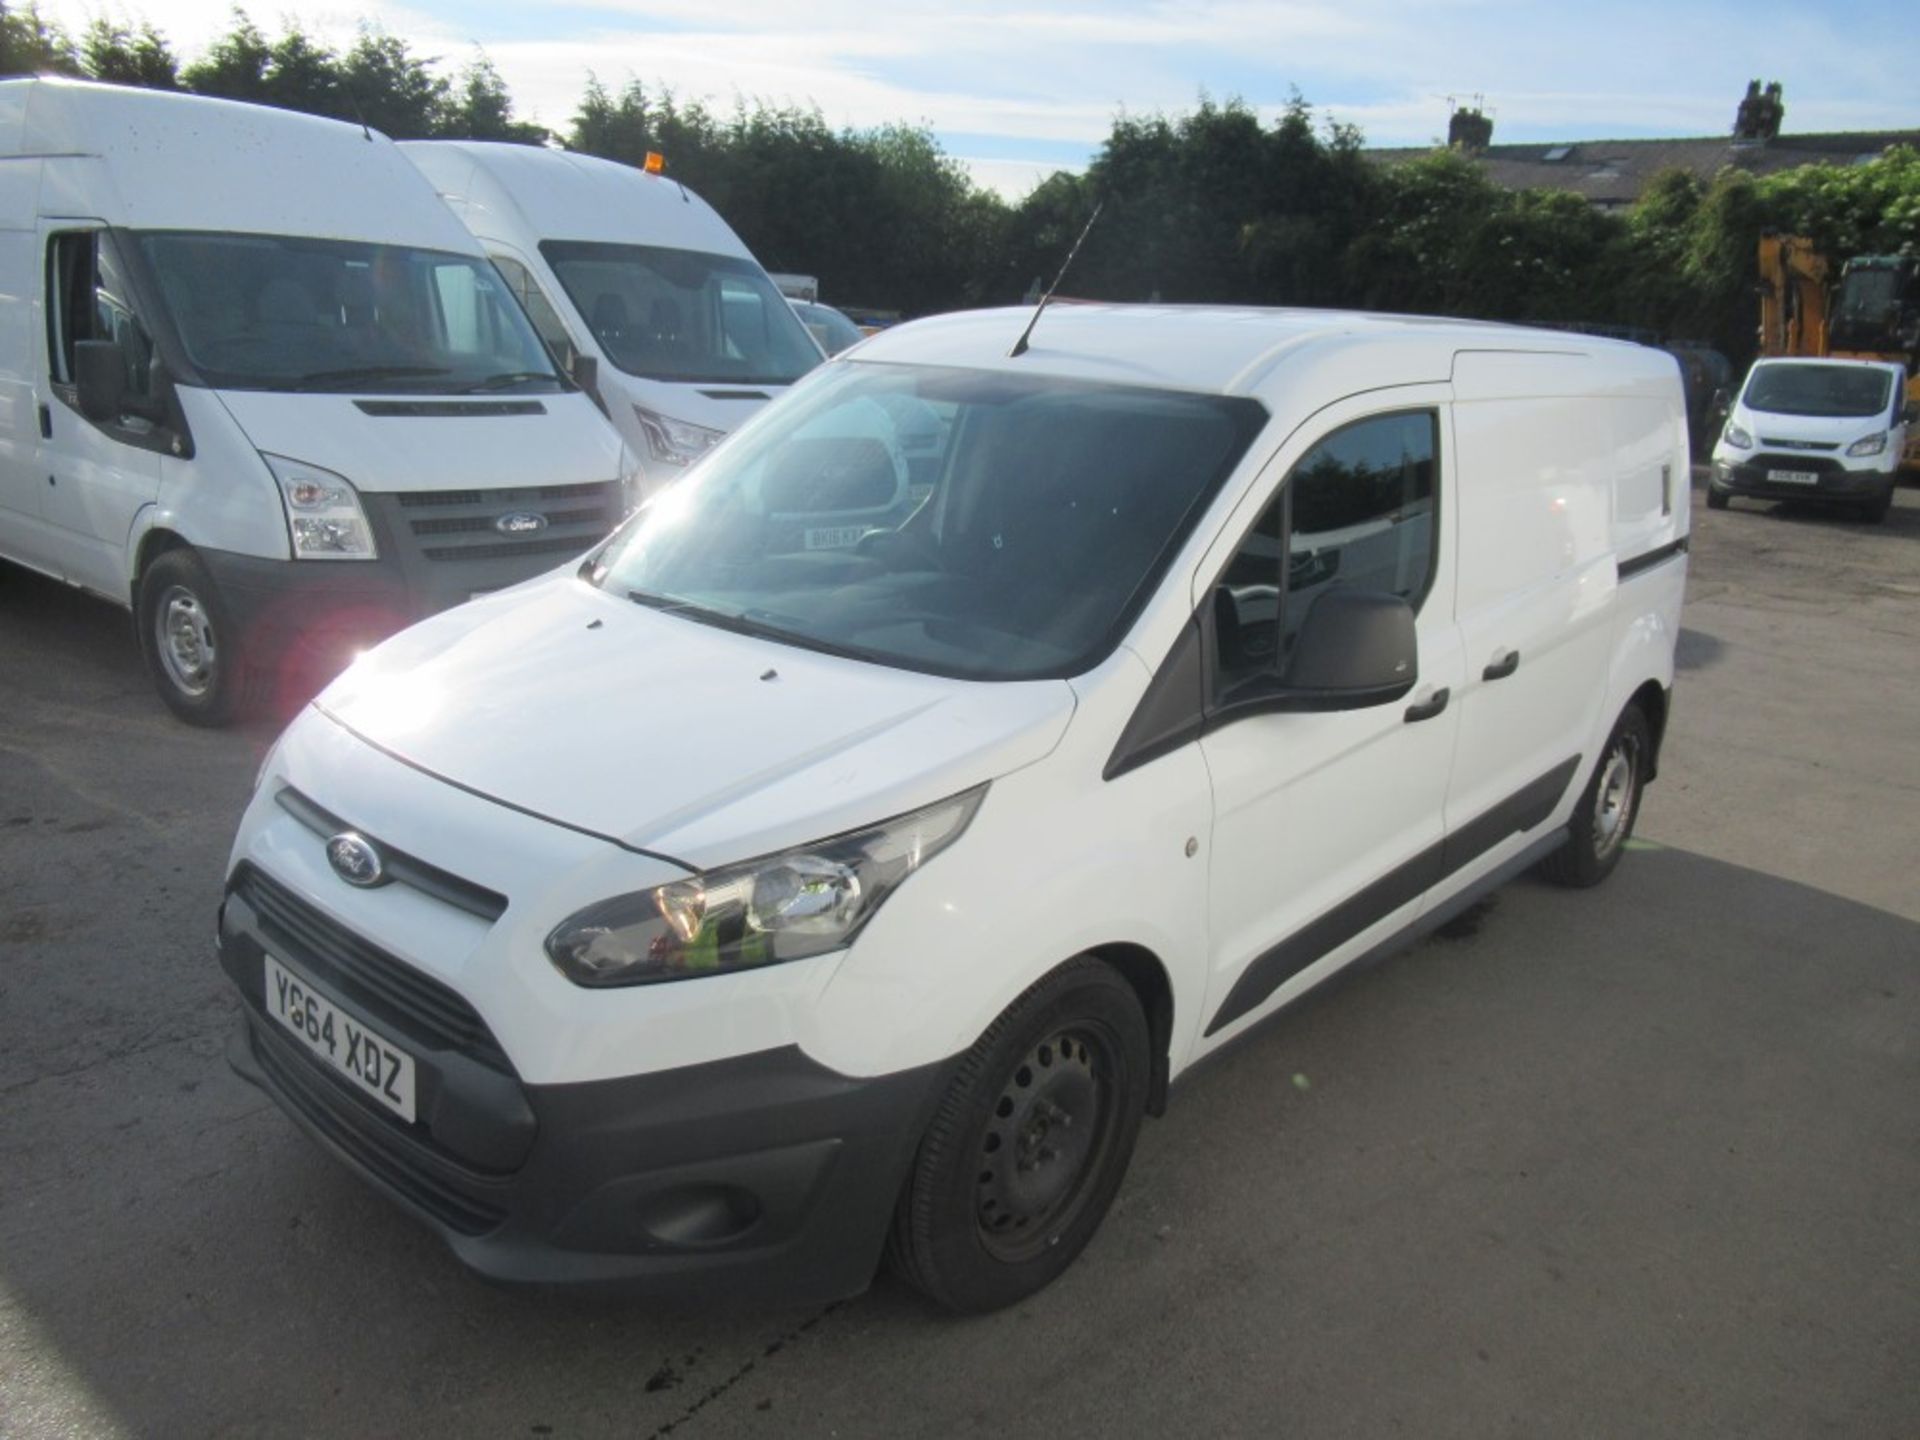 64 reg FORD TRANSIT CONNECT 210 ECO-TECH C/W REACH & WASH SYSTEM IN REAR, 1ST REG 09/14, 120053M - Image 2 of 7